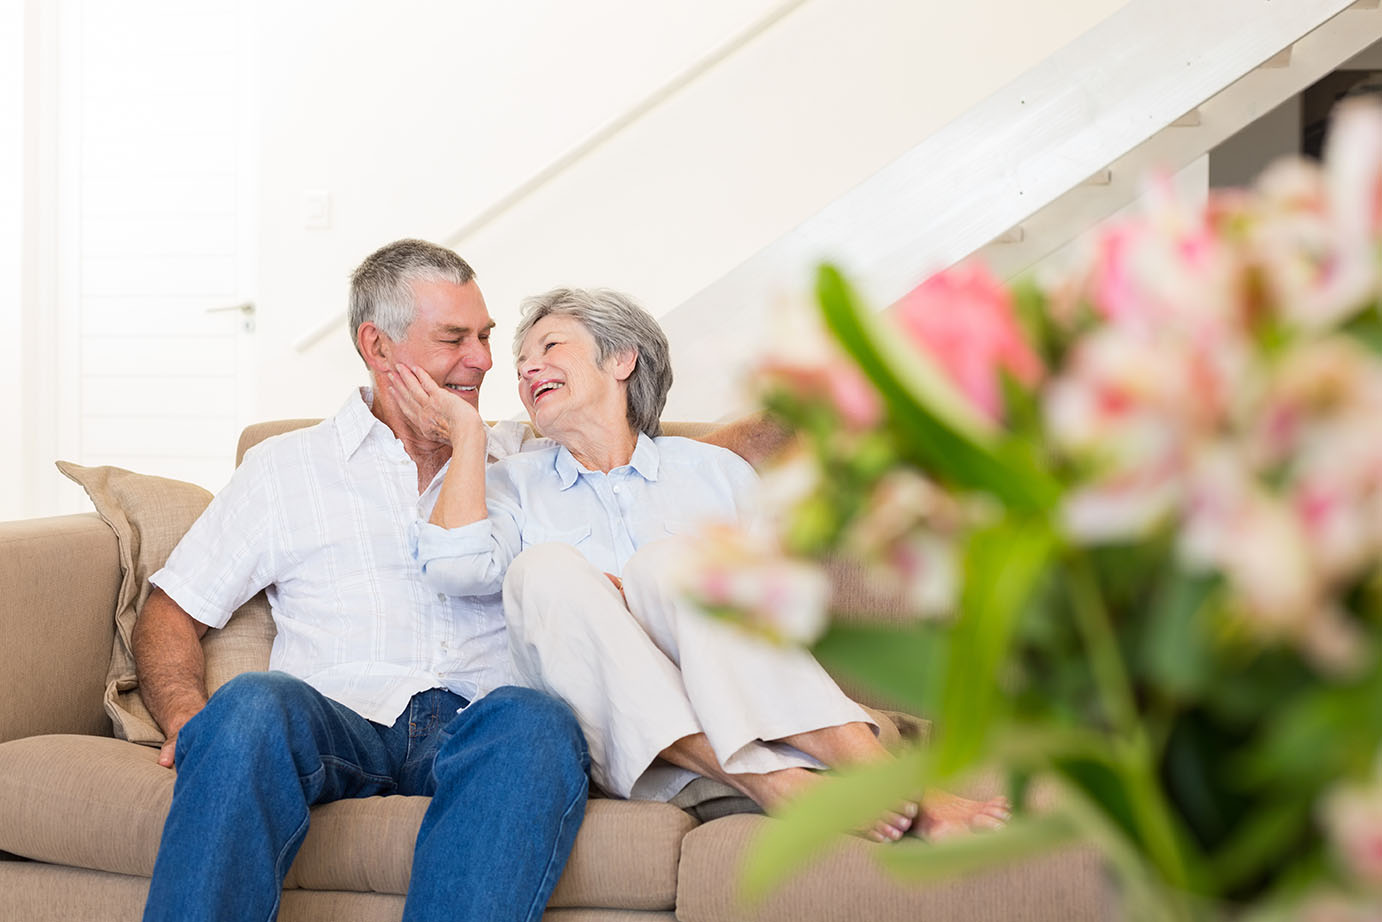 Elderly couple sitting on a couch with a bouquet of flowers blurry in the foreground